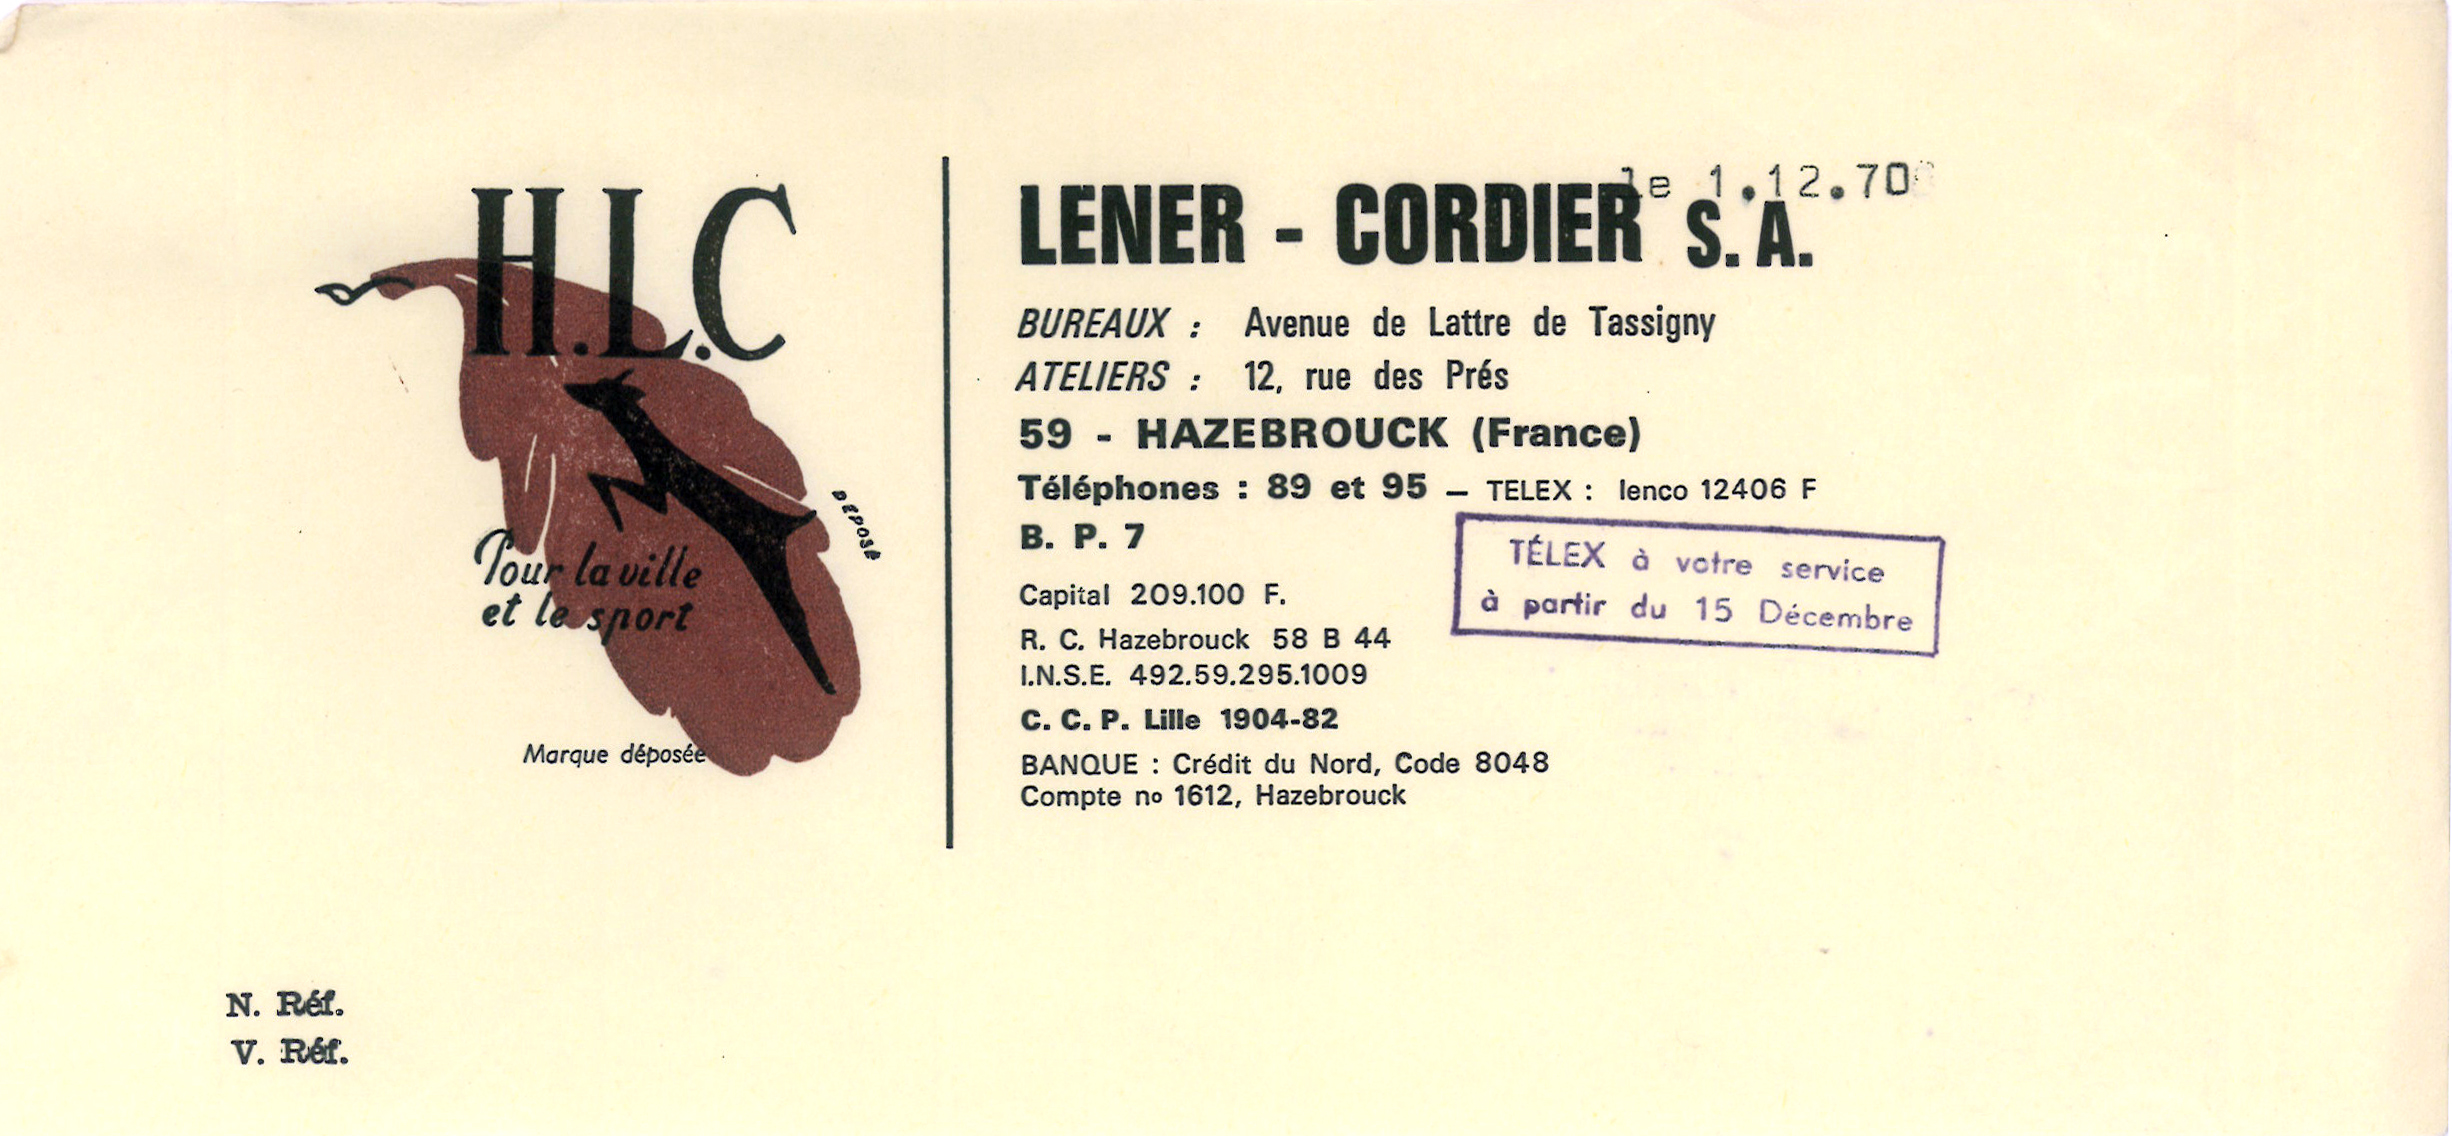 br/>French family company - expert manufacturer — LENER CORDIER